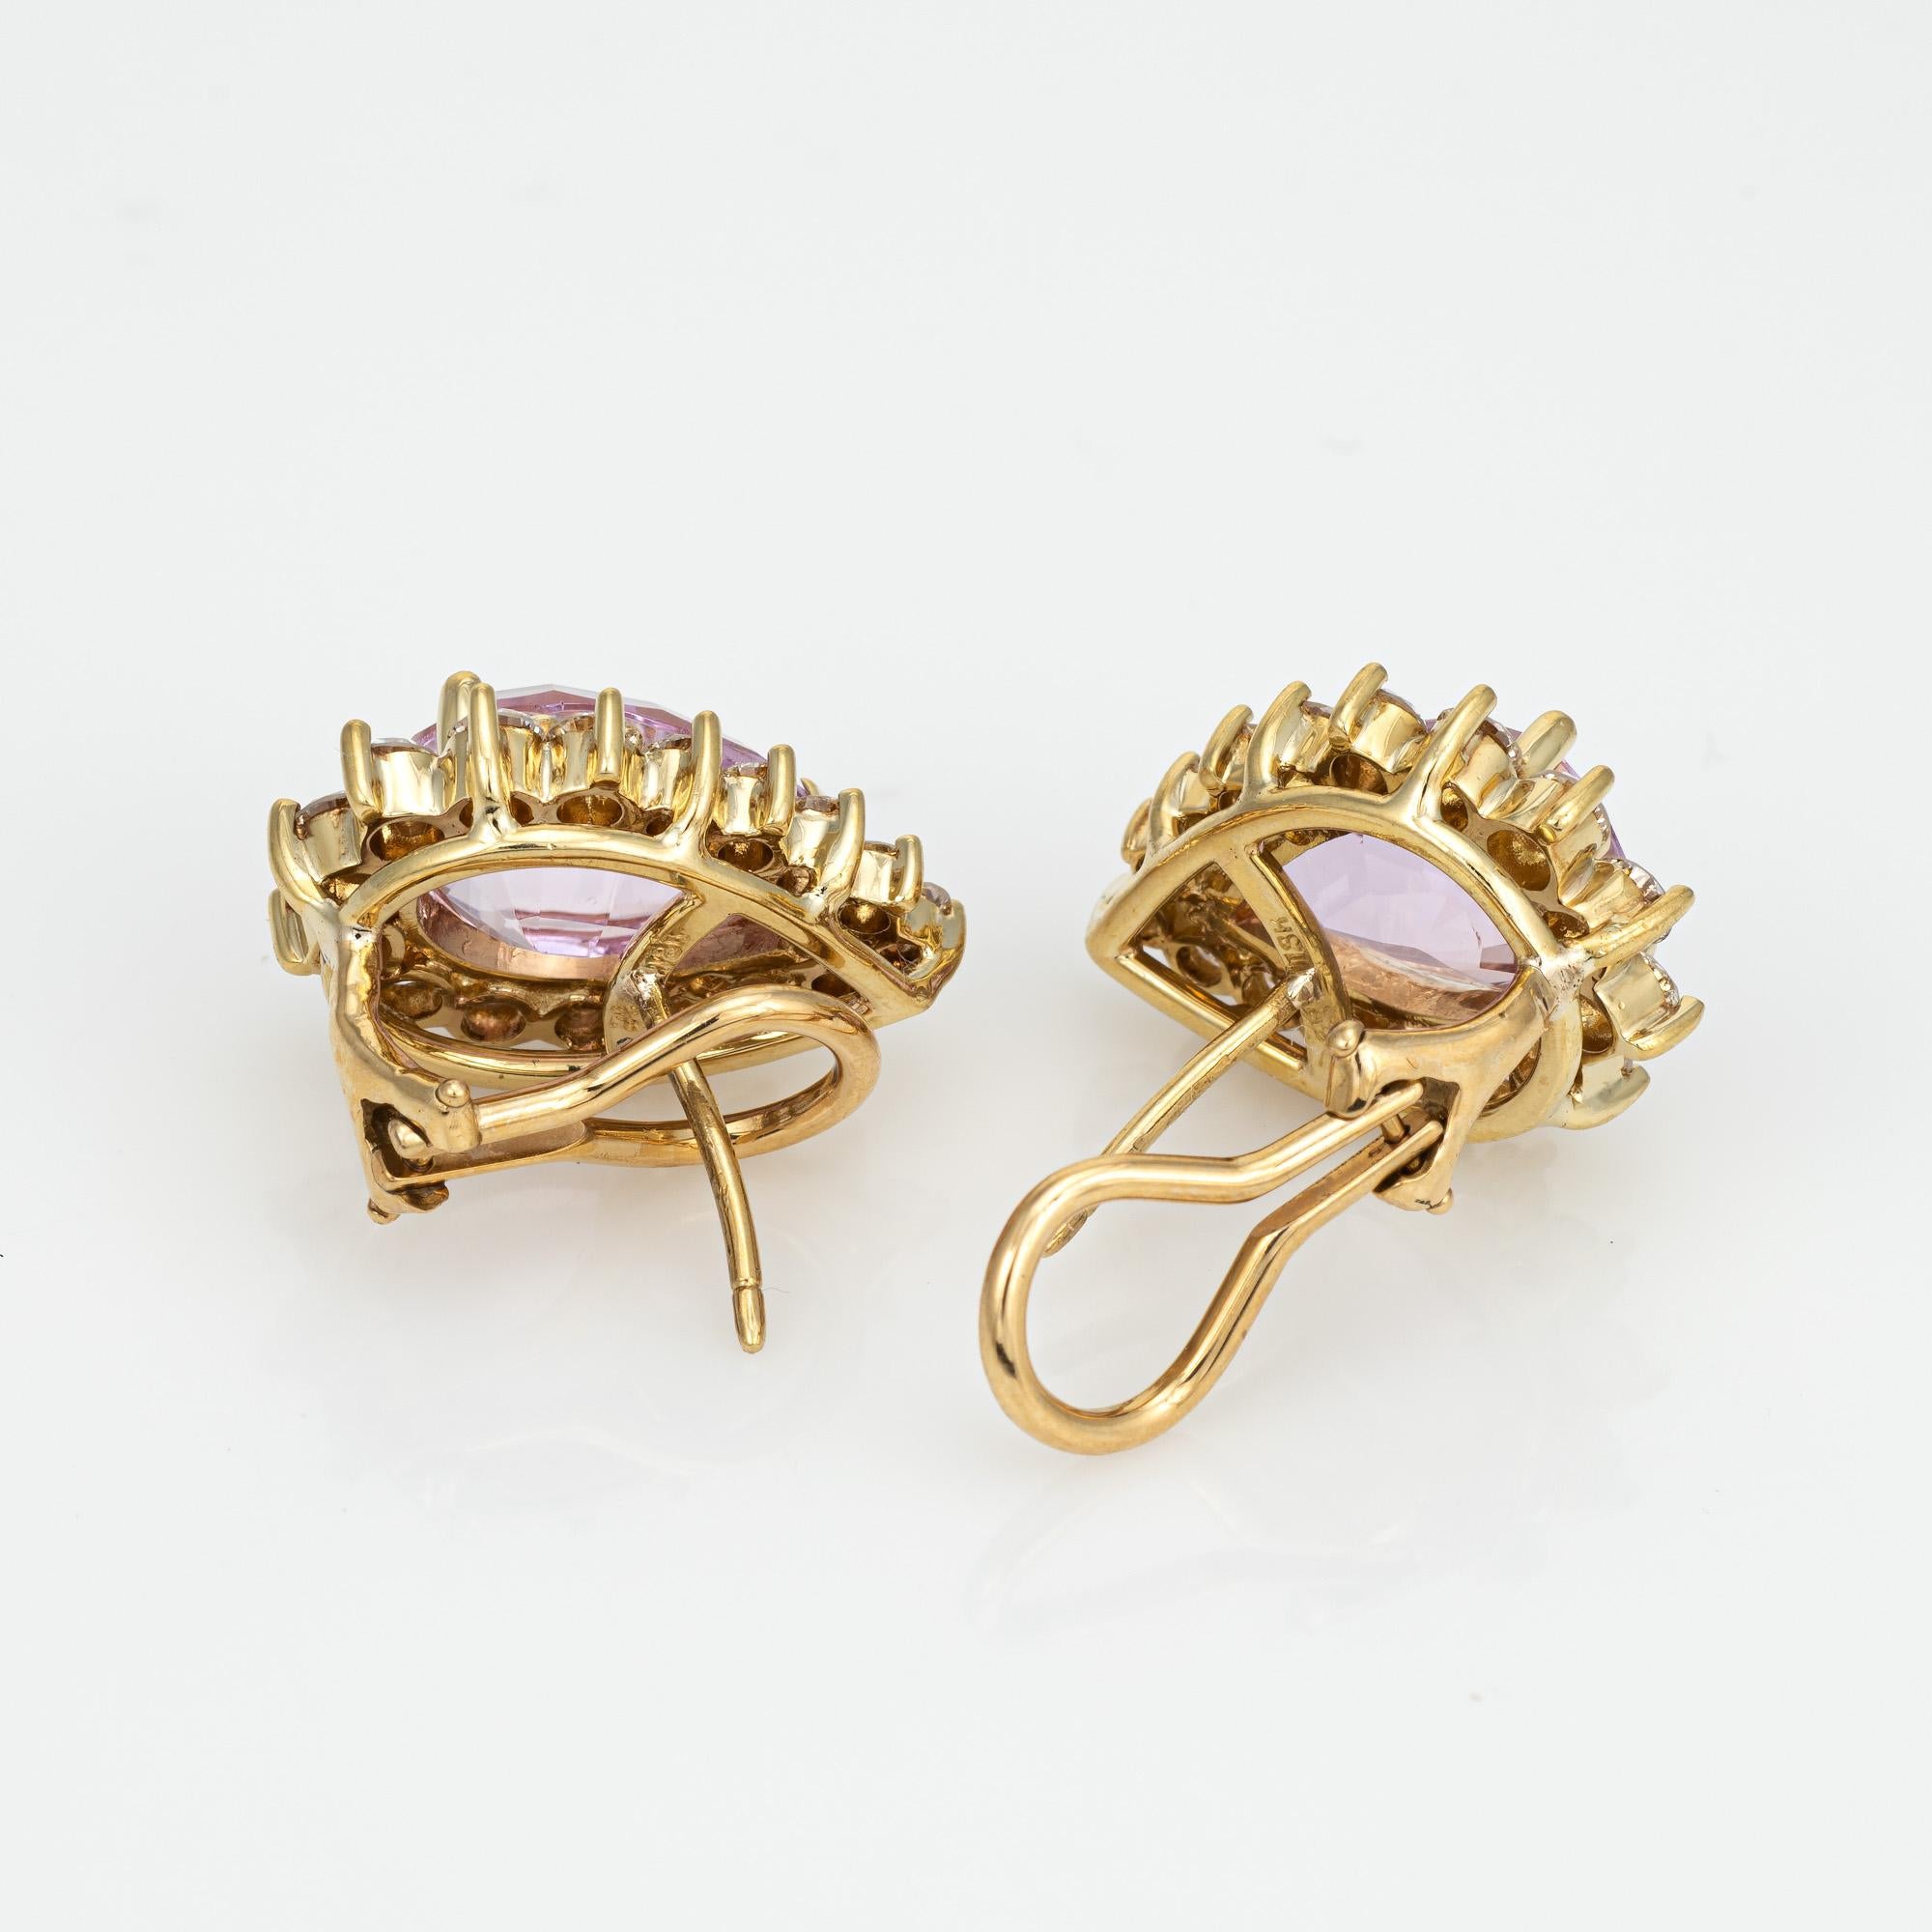 Elegant pair of vintage kunzite & diamond earrings crafted in 18k yellow gold (circa 1980s). 

Faceted pear shaped kunzite is estimated at 3.50 carats each (7 carats total estimated weight). 22 diamonds range in size from 0.03 to 0.08 carats and